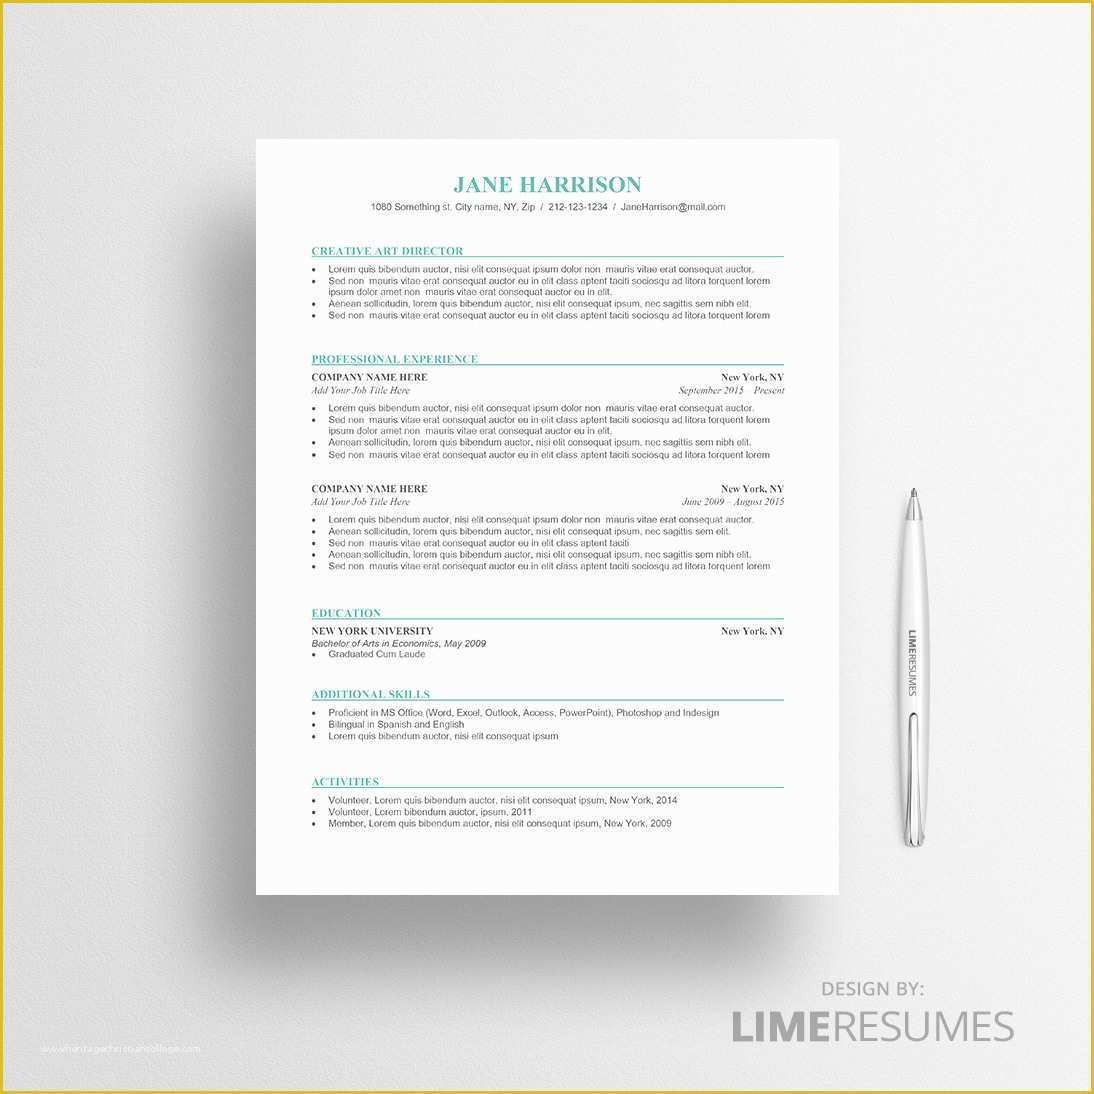 Ats Friendly Resume Template Free Of ats Friendly Resume Template ats Resume Template